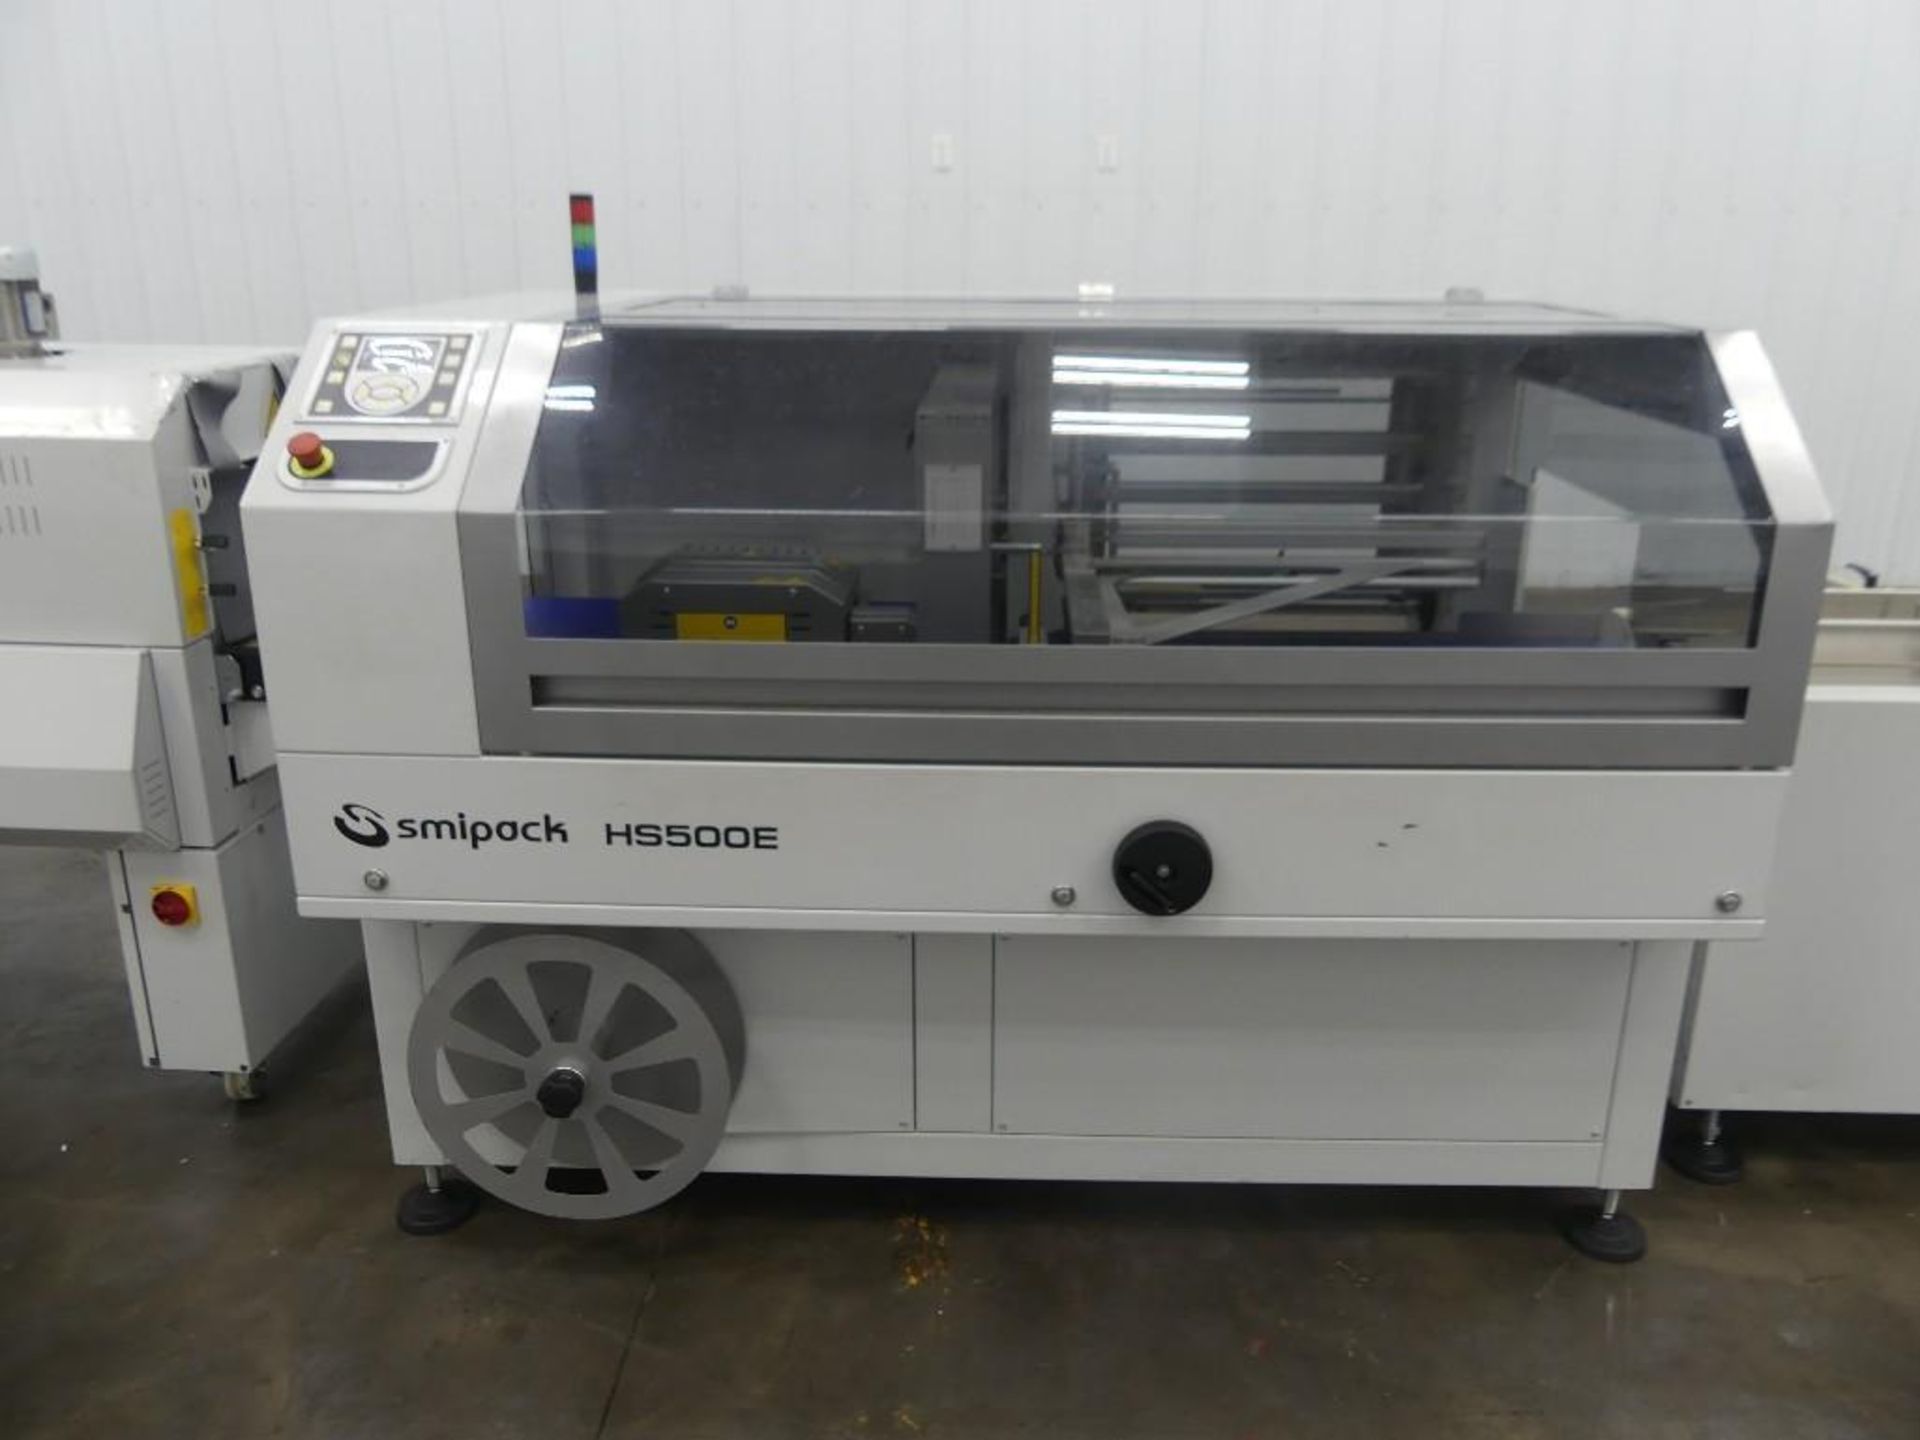 Smipack HS500E Semi-Automatic Side Sealer - Image 12 of 77